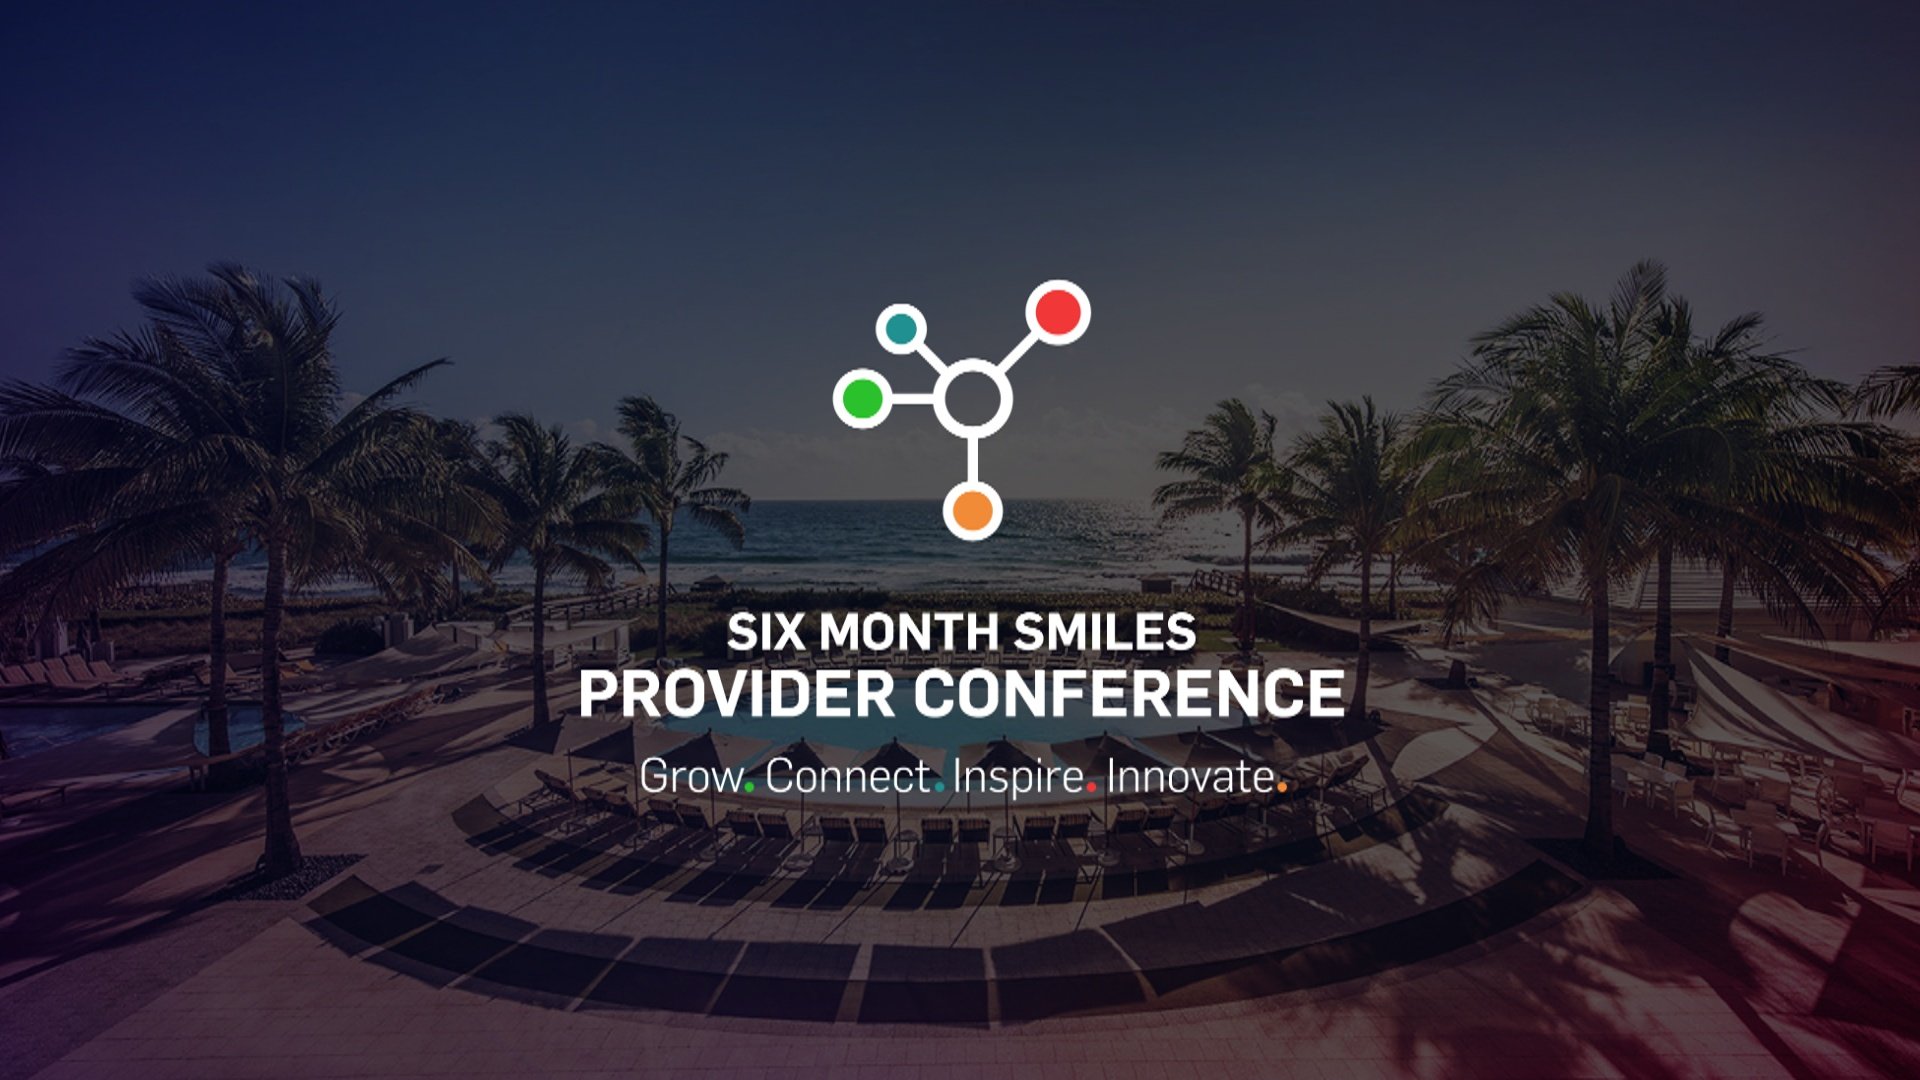 The Six Month Smiles Provider Conference is almost here!